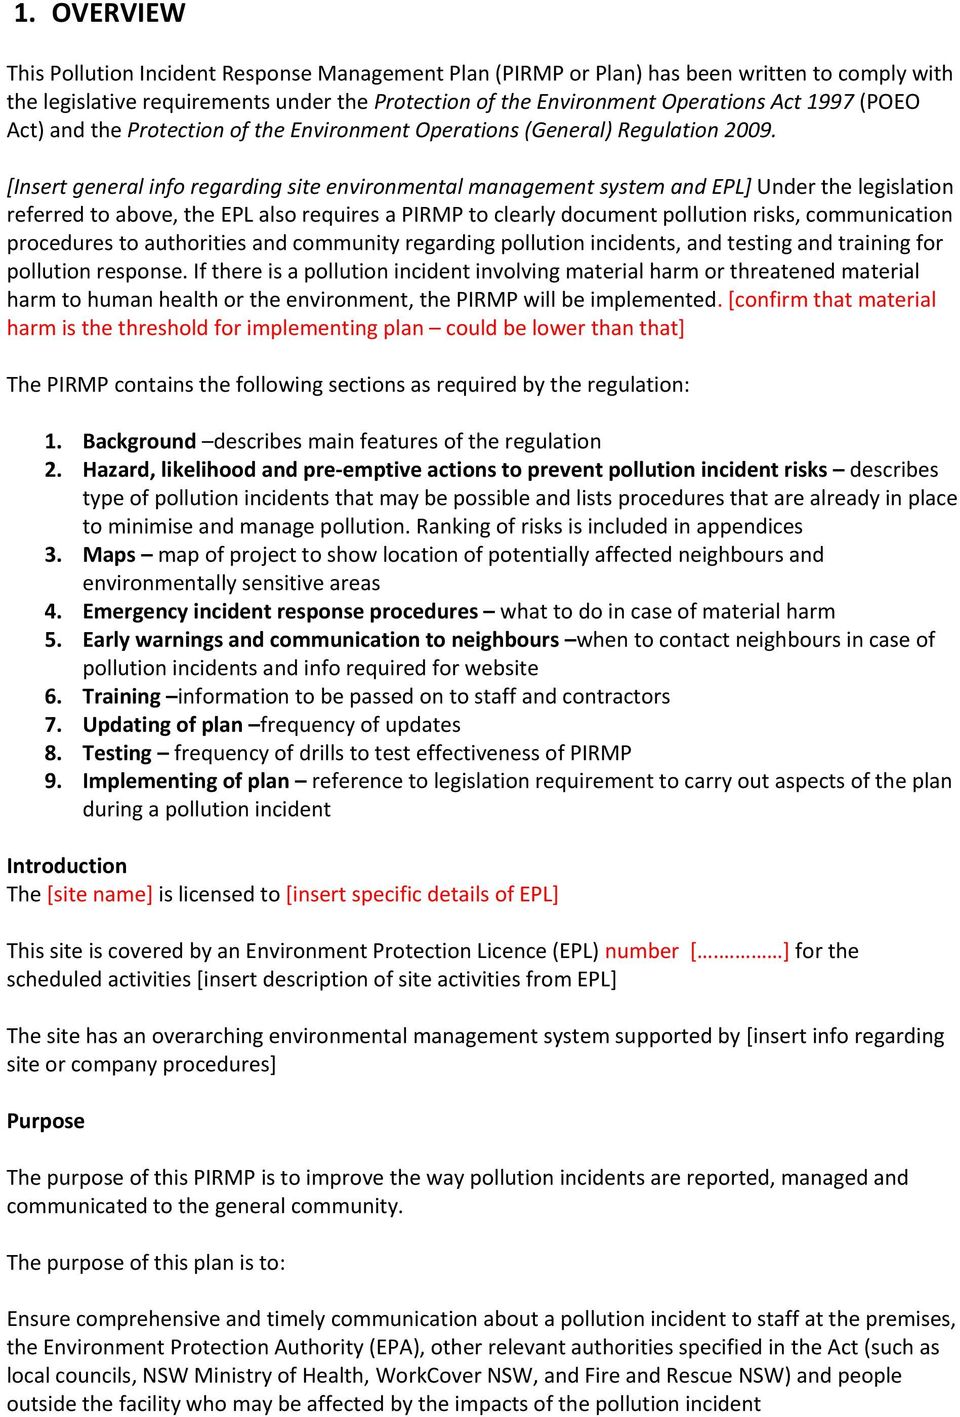 [Insert general info regarding site environmental management system and EPL] Under the legislation referred to above, the EPL also requires a PIRMP to clearly document pollution risks, communication